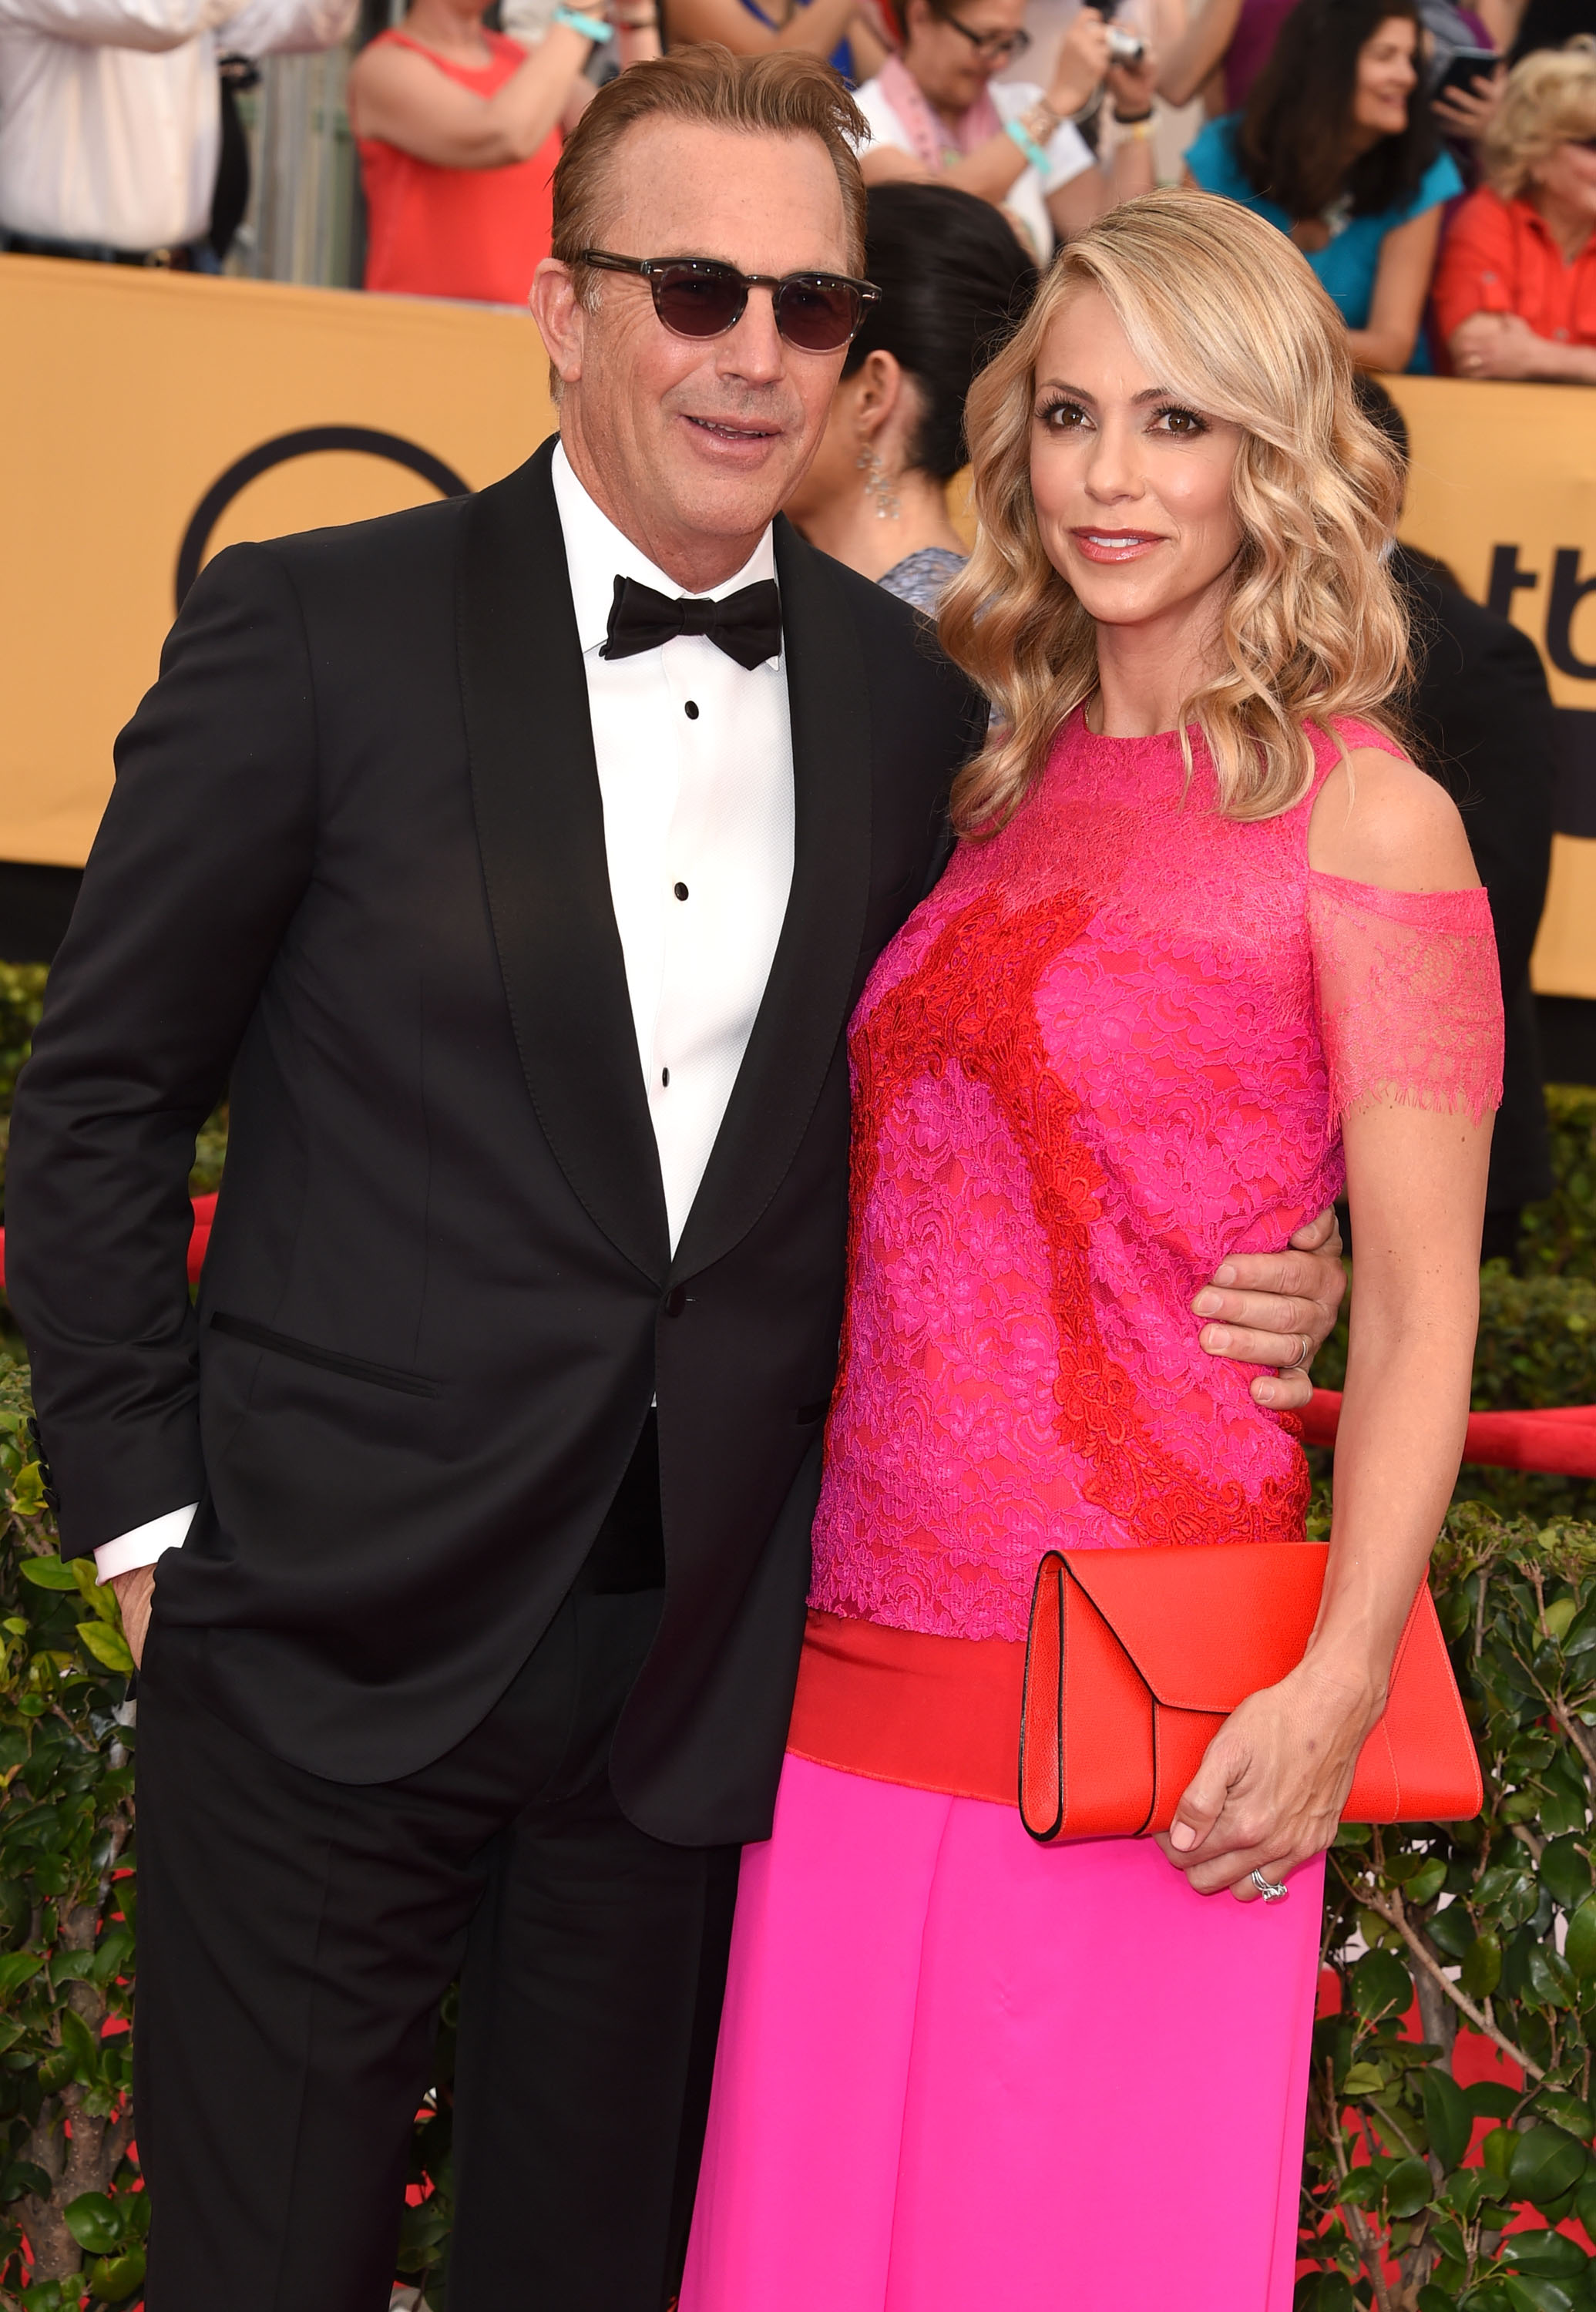 Kevin Costner and Christine Baumgartner at the 21st Annual Screen Actors Guild Awards in Los Angeles, California, on January 25, 2015. | Source: Getty Images